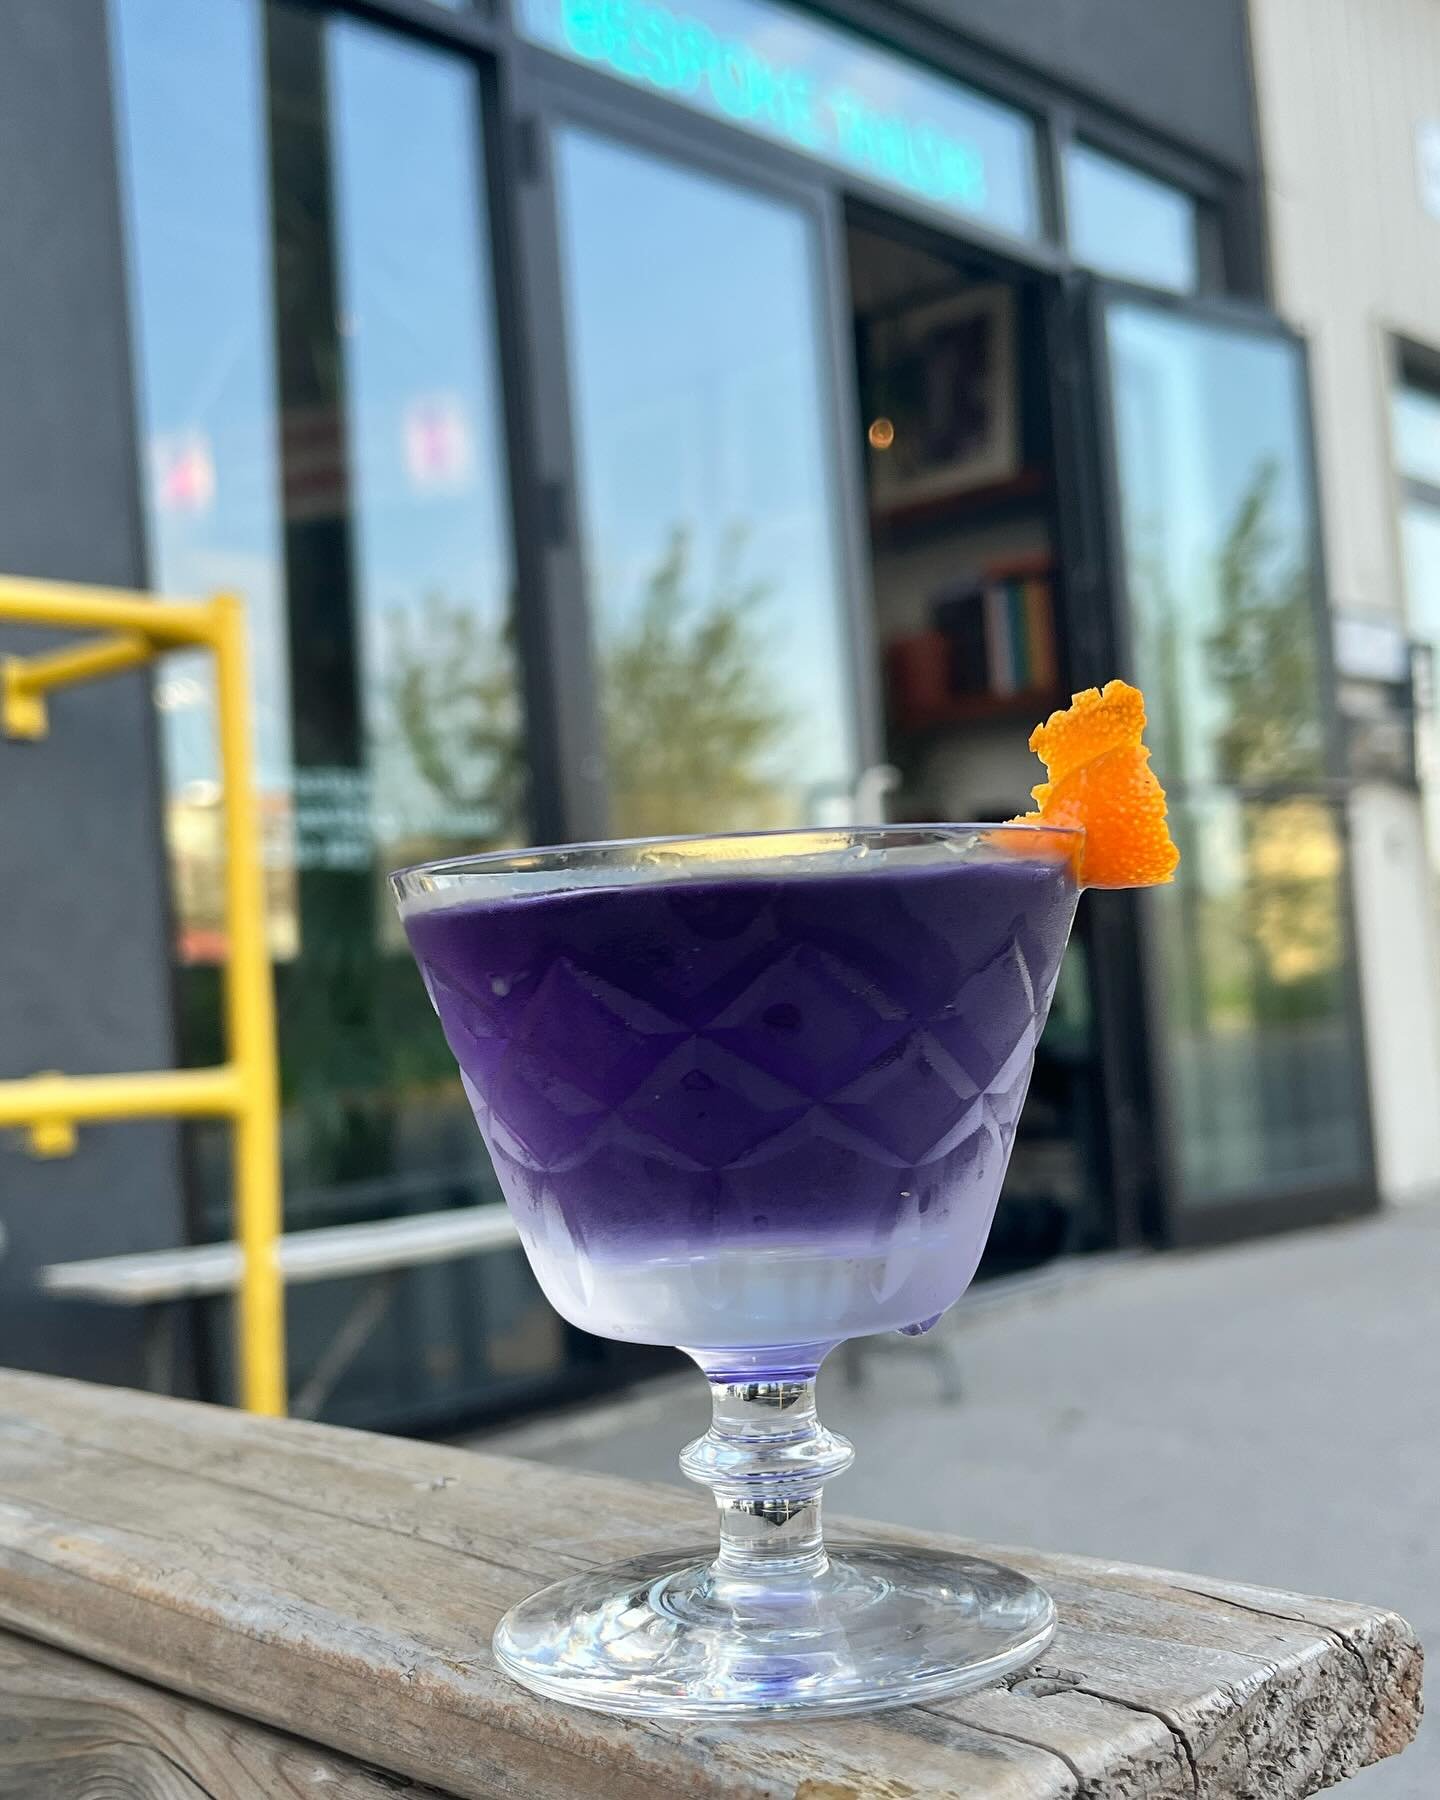 I know it&rsquo;s Saturday, not Friday, but here is a #tailoredtipples for you anyway.

Attention

3/4 oz gin
3/4 oz dry vermouth
1/2 oz absinthe or 3/4 oz Pernod
3/4 oz cr&egrave;me de Violette
2 dashes orange bitters 

Add all of the ingredient to 